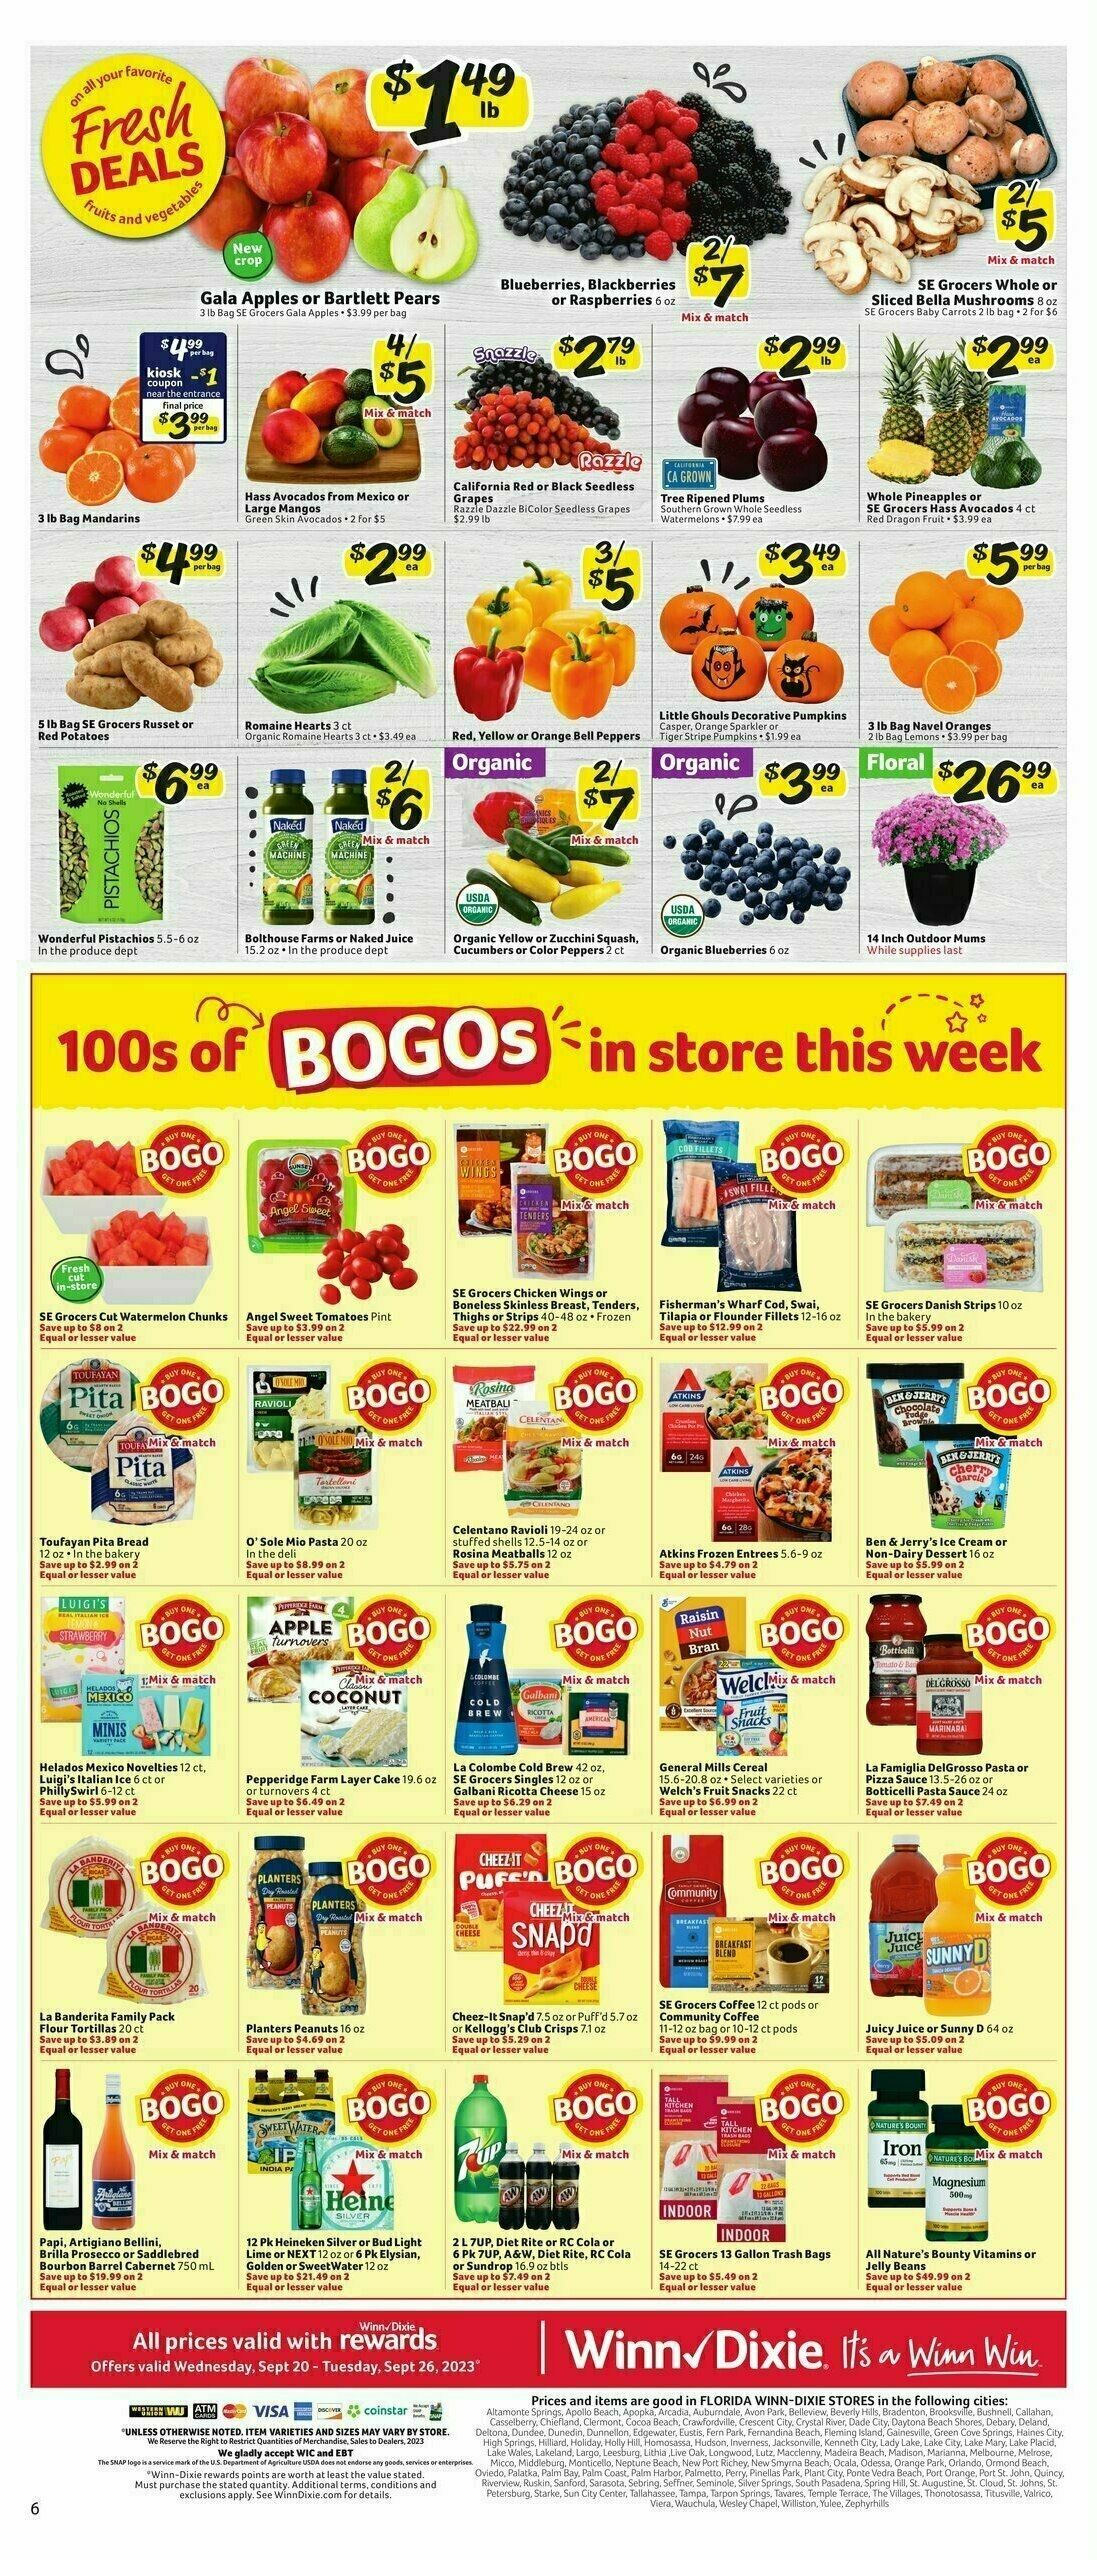 Winn-Dixie Weekly Ad from September 20